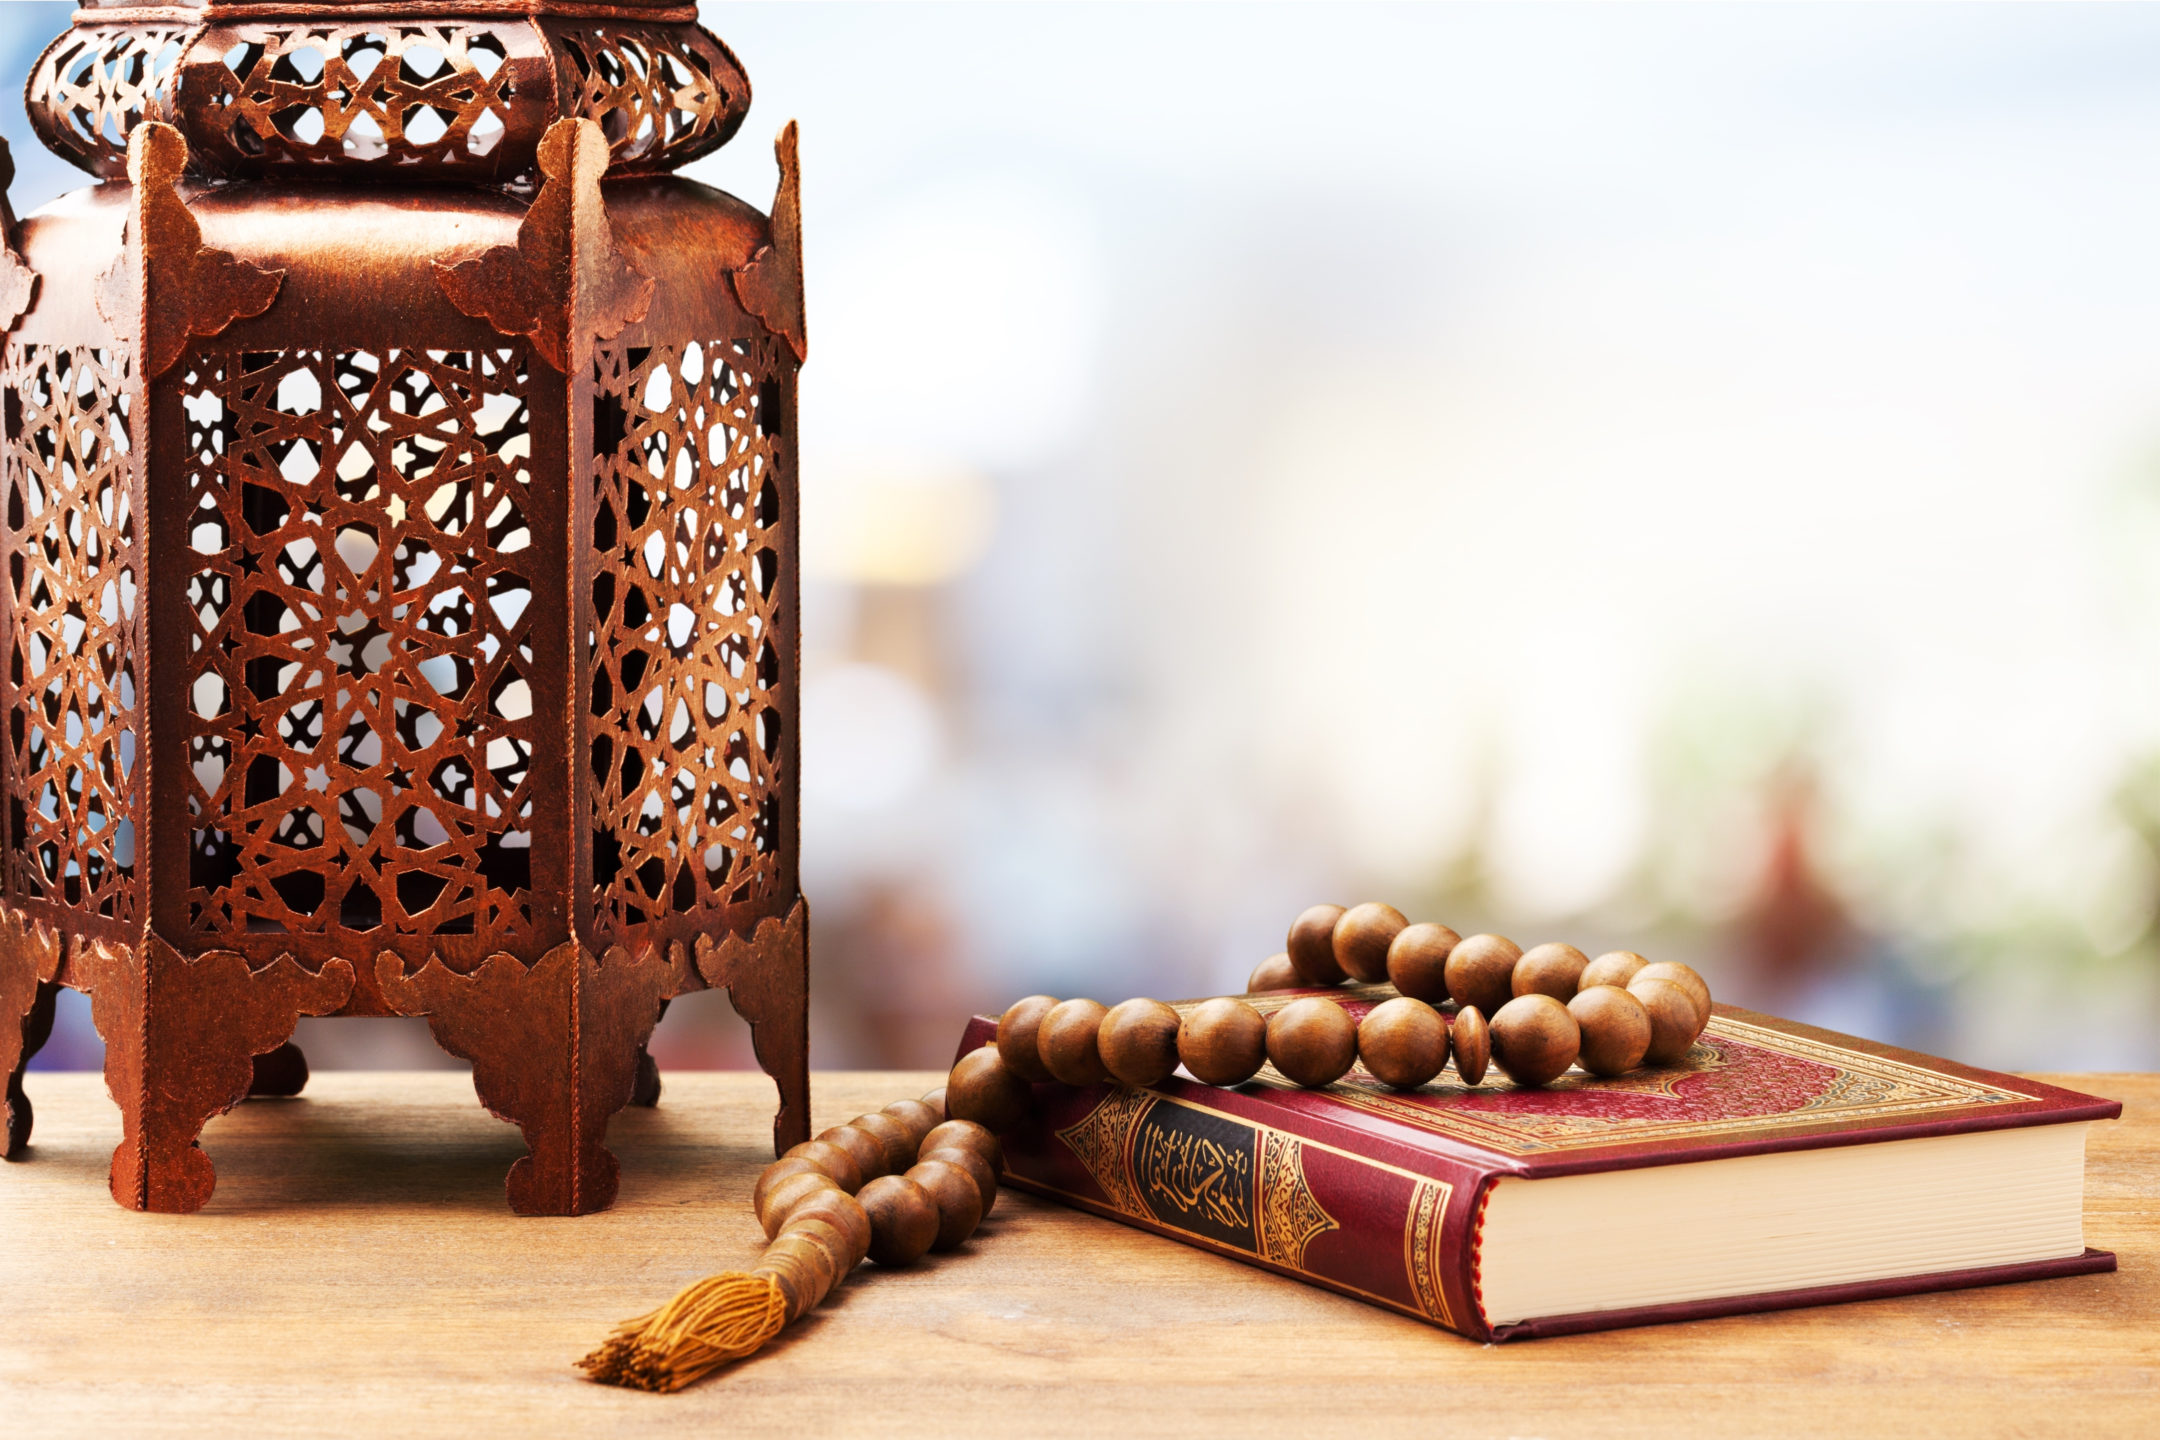 Islamic Holy Book Quran with rosary beads